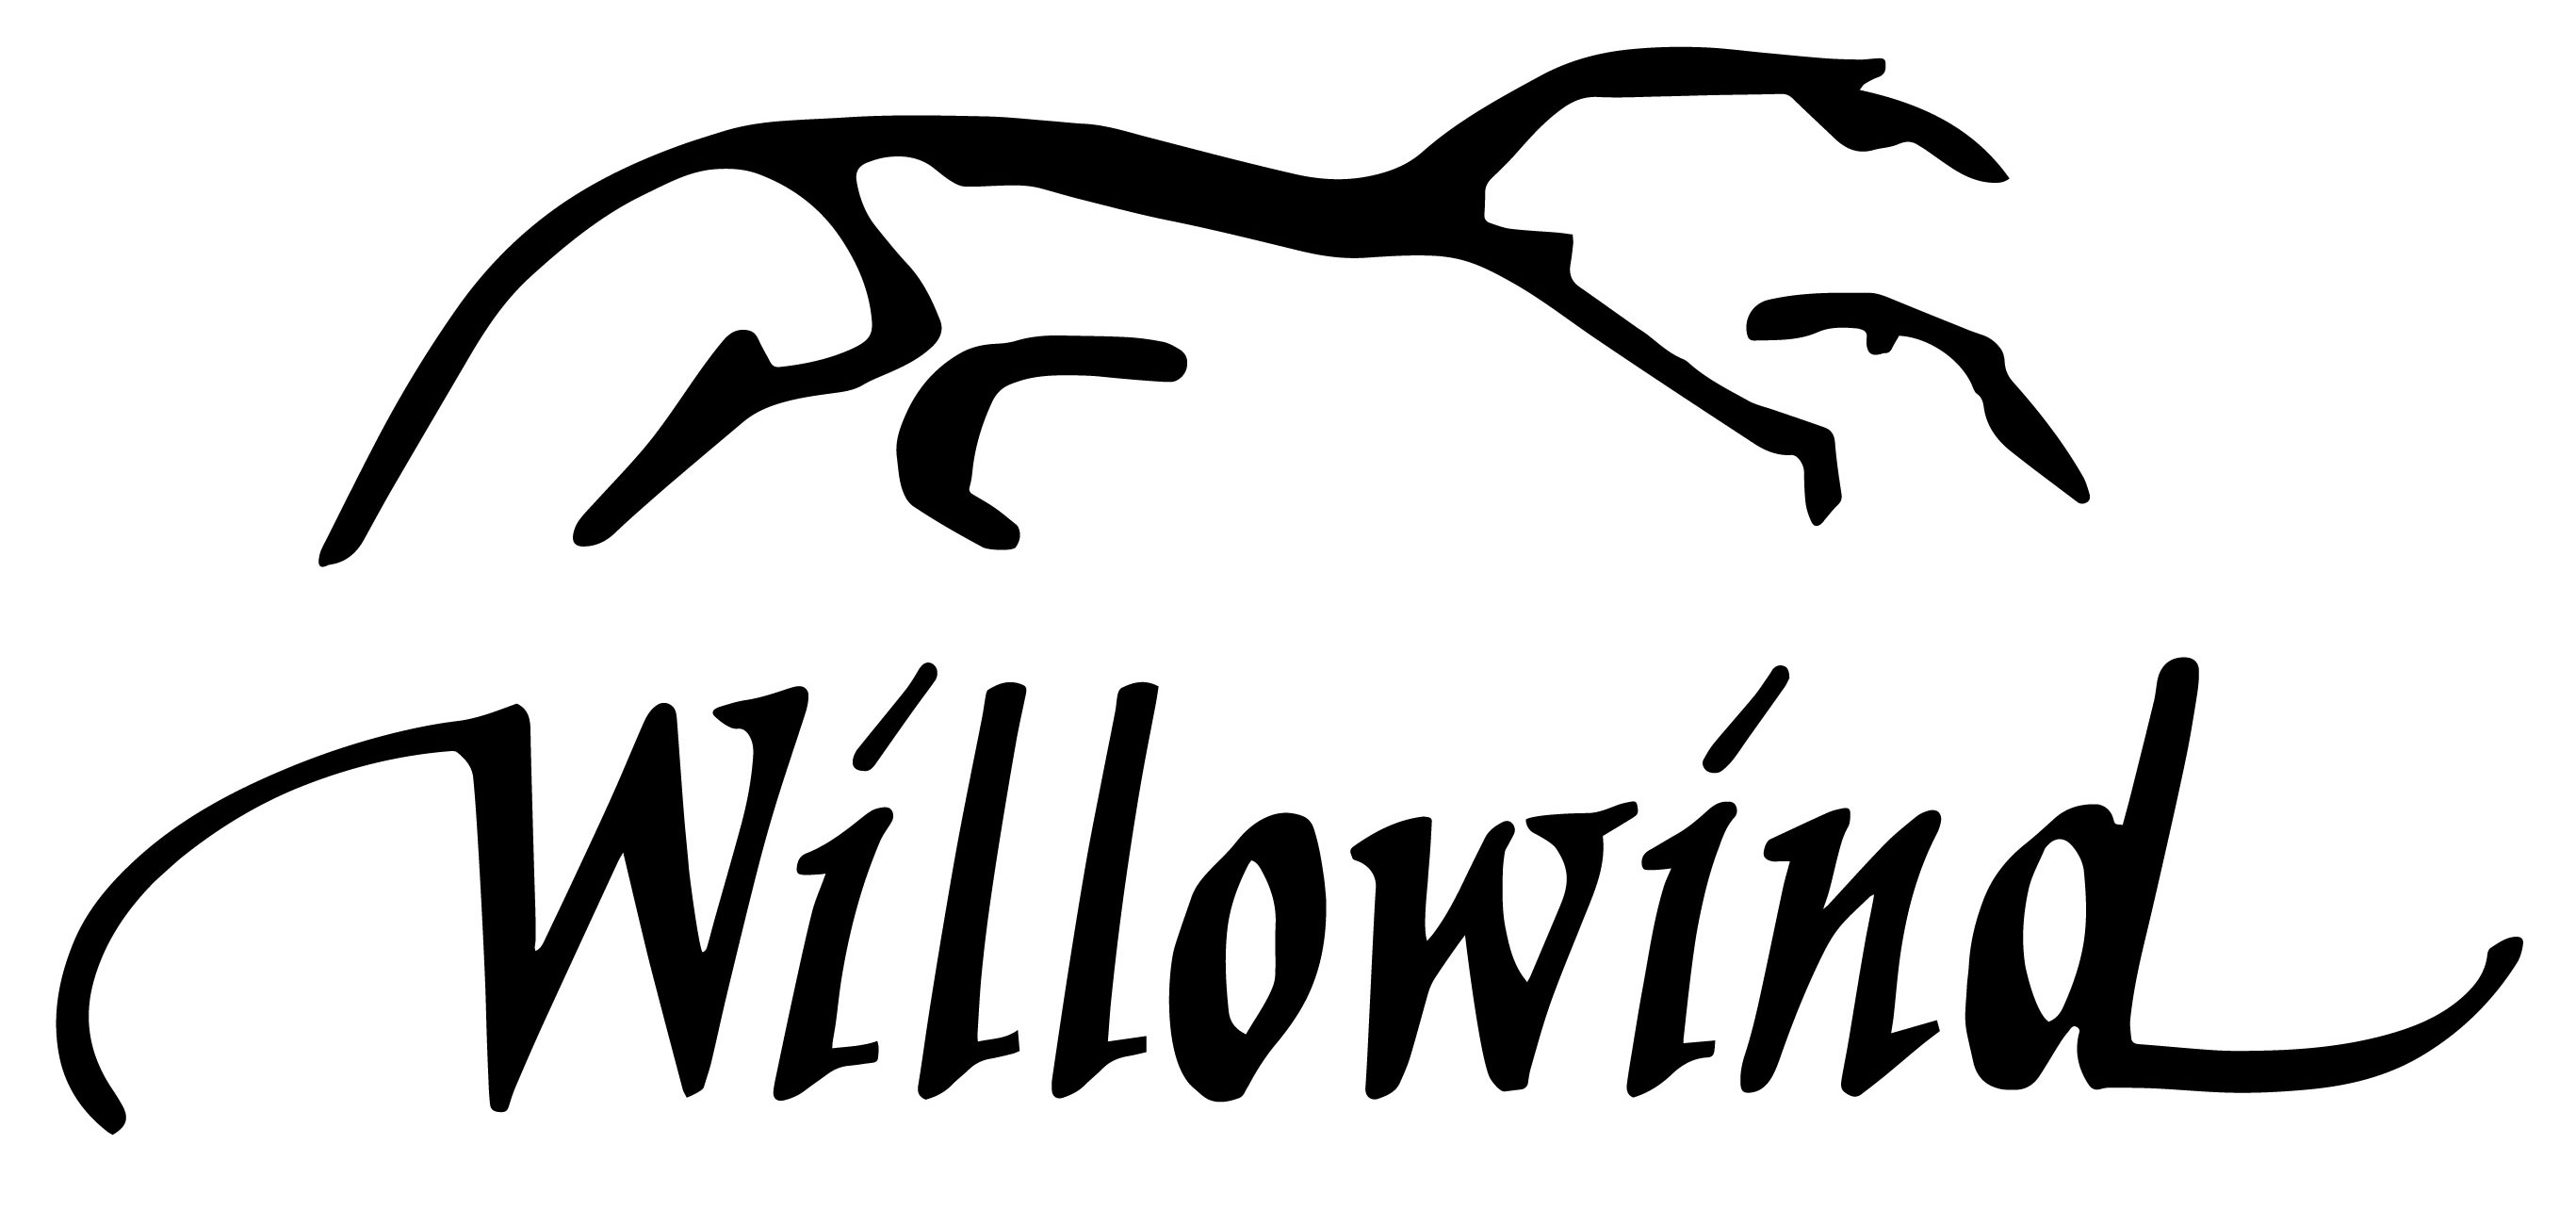 Willowind Therapeutic Riding Center